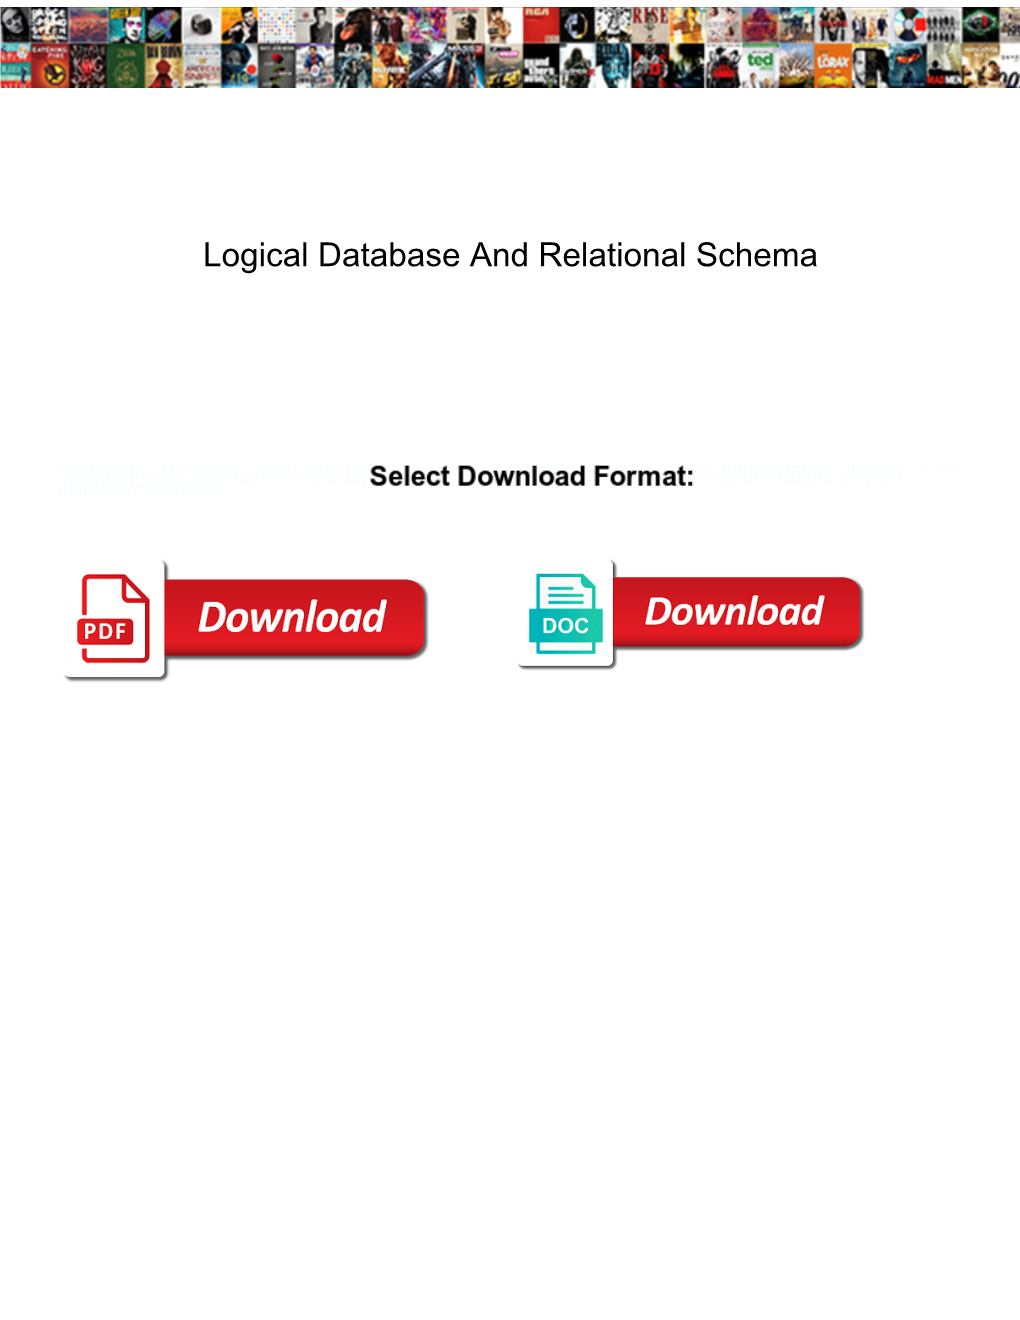 Logical Database and Relational Schema